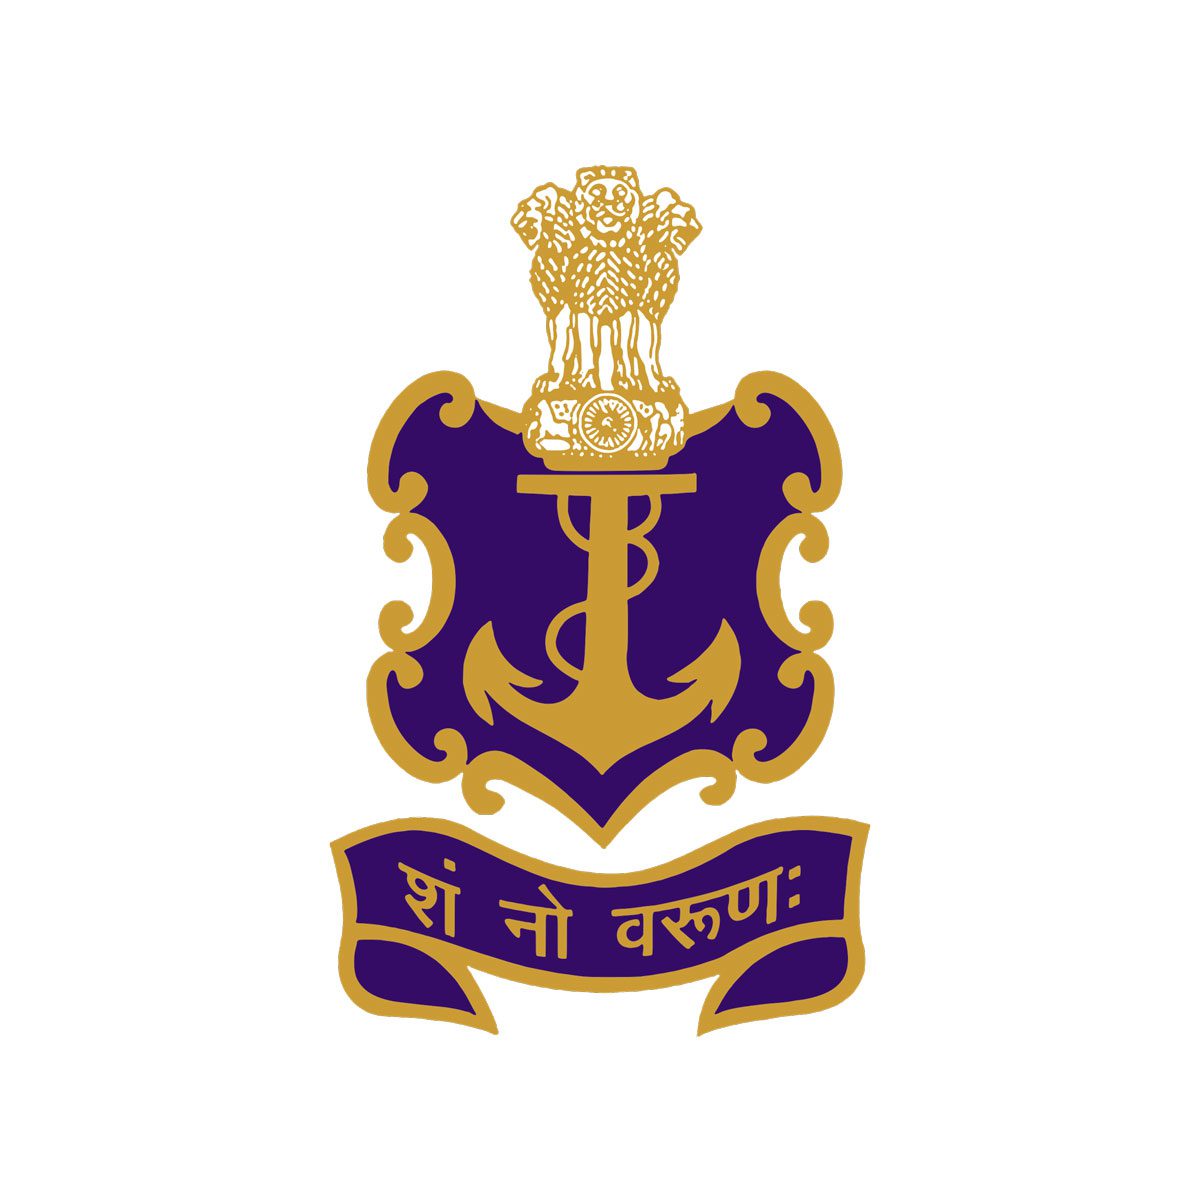 Indian Navy Electroplater Apprentice Recruitment - Indian Armed Forces Job Vacancies